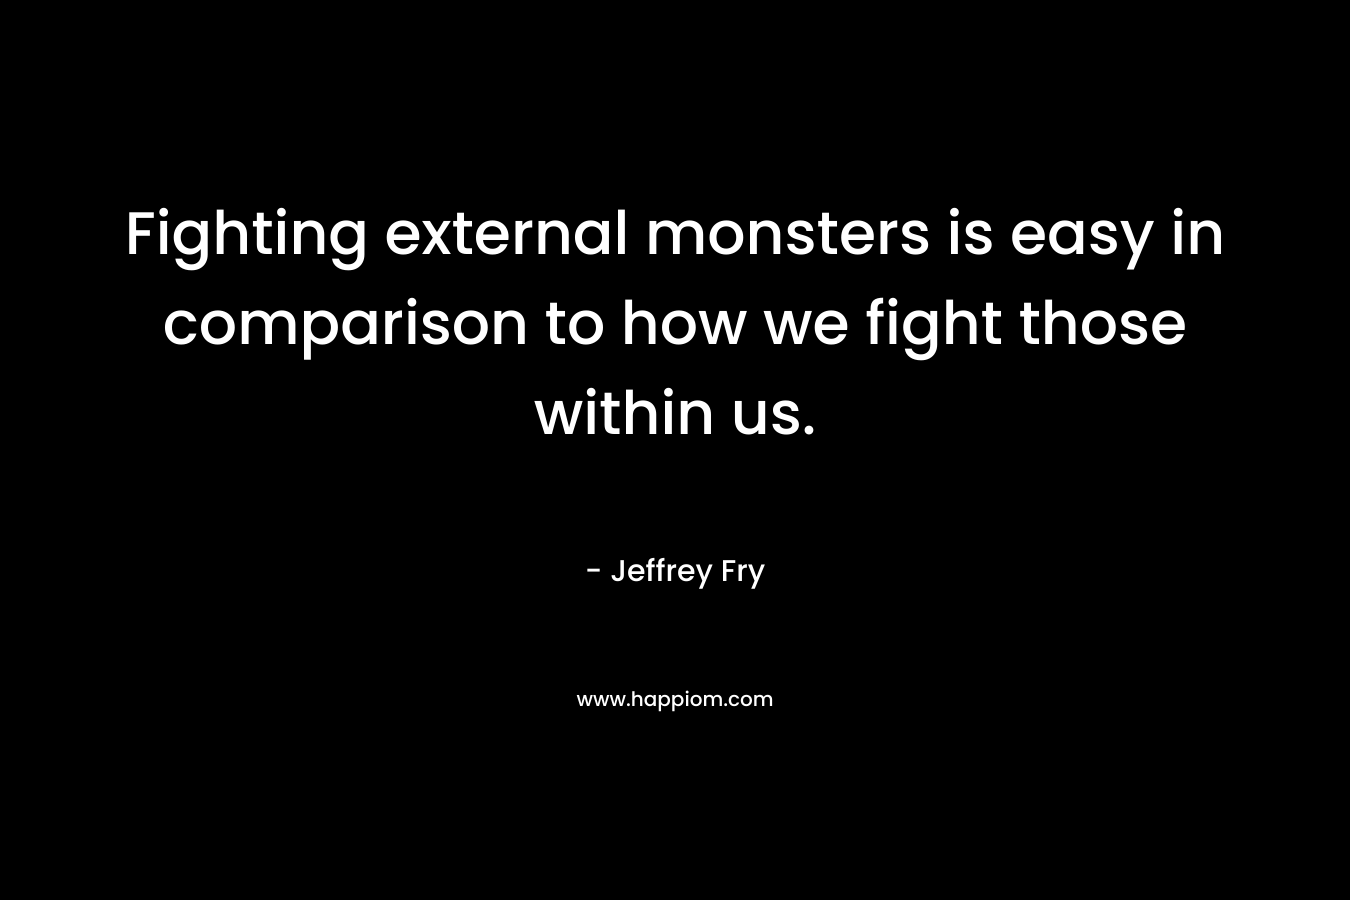 Fighting external monsters is easy in comparison to how we fight those within us. – Jeffrey Fry